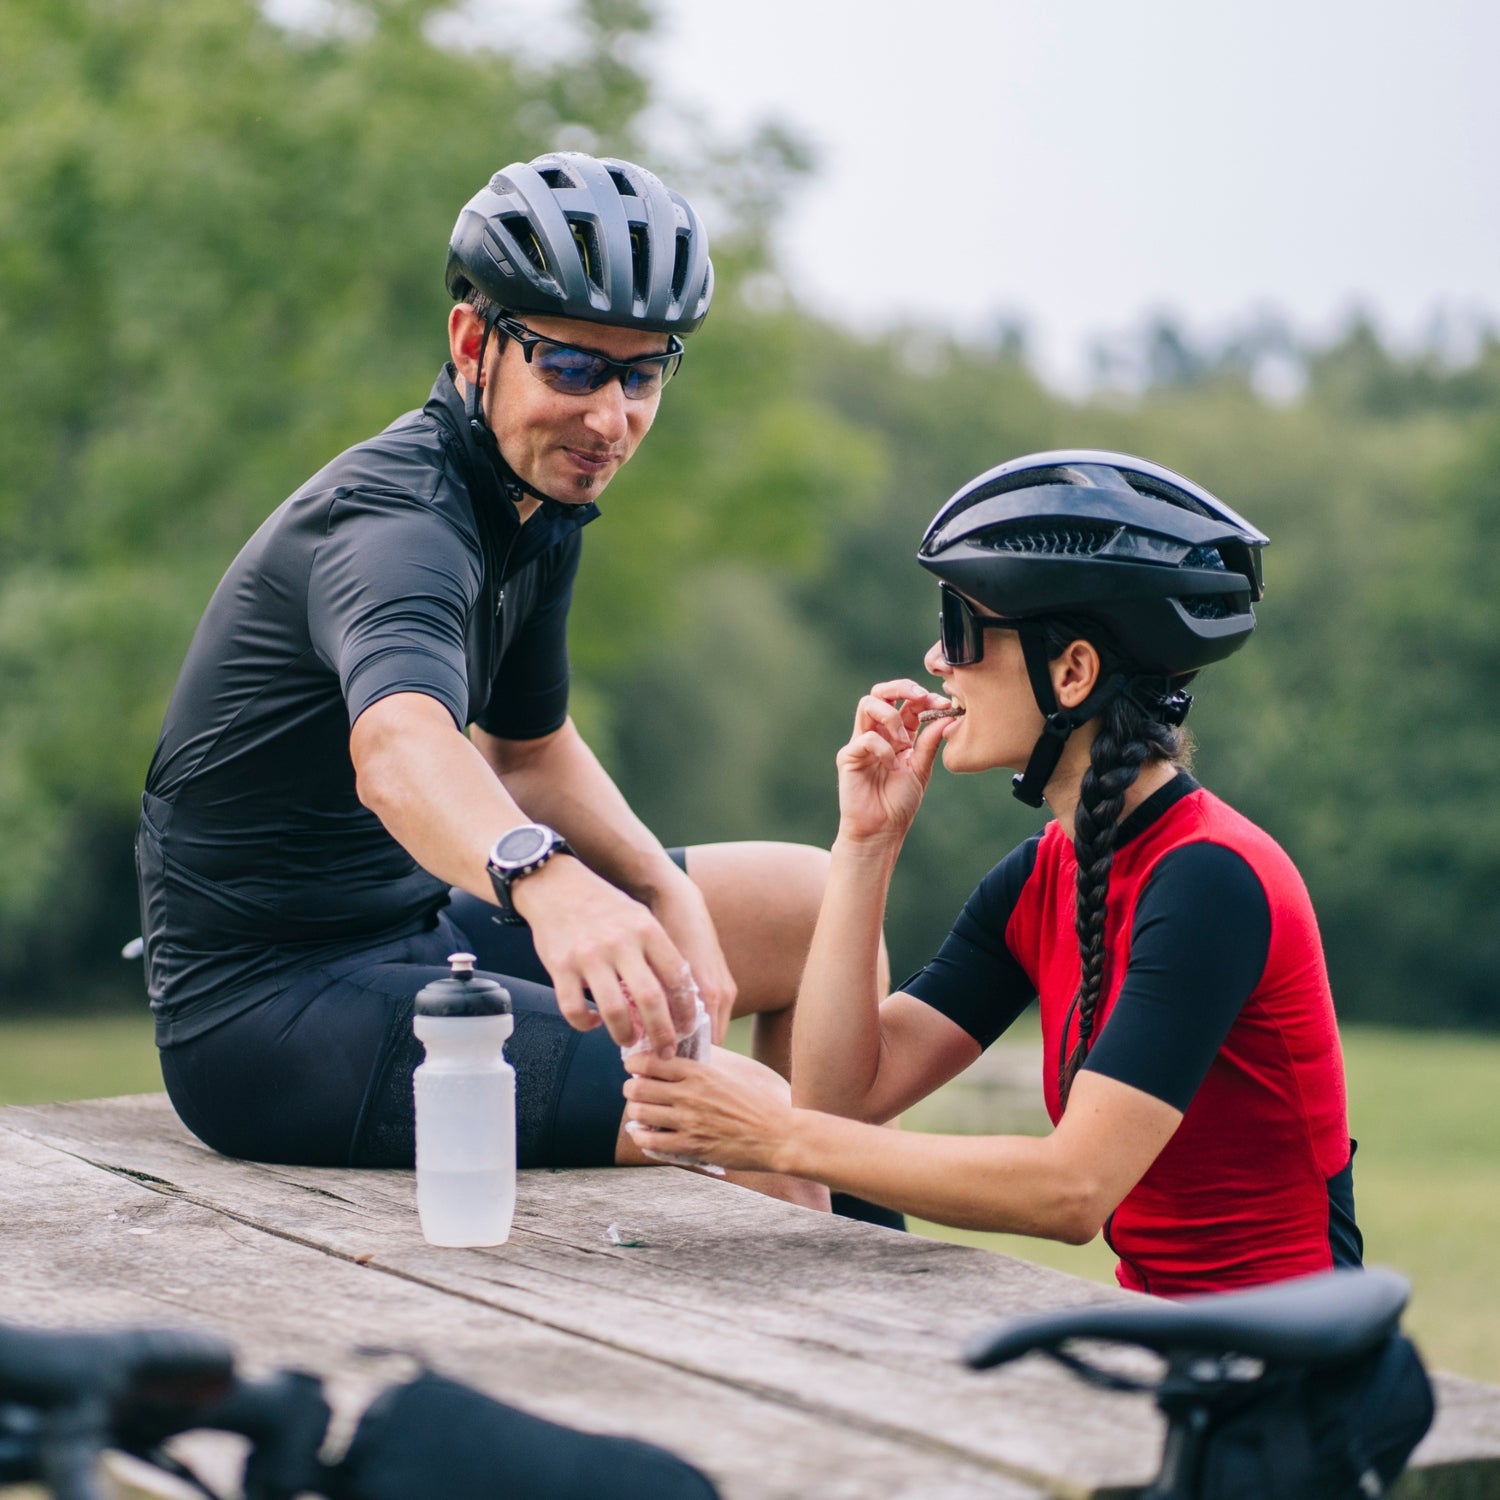 Endurance nutrition for outdoor activities